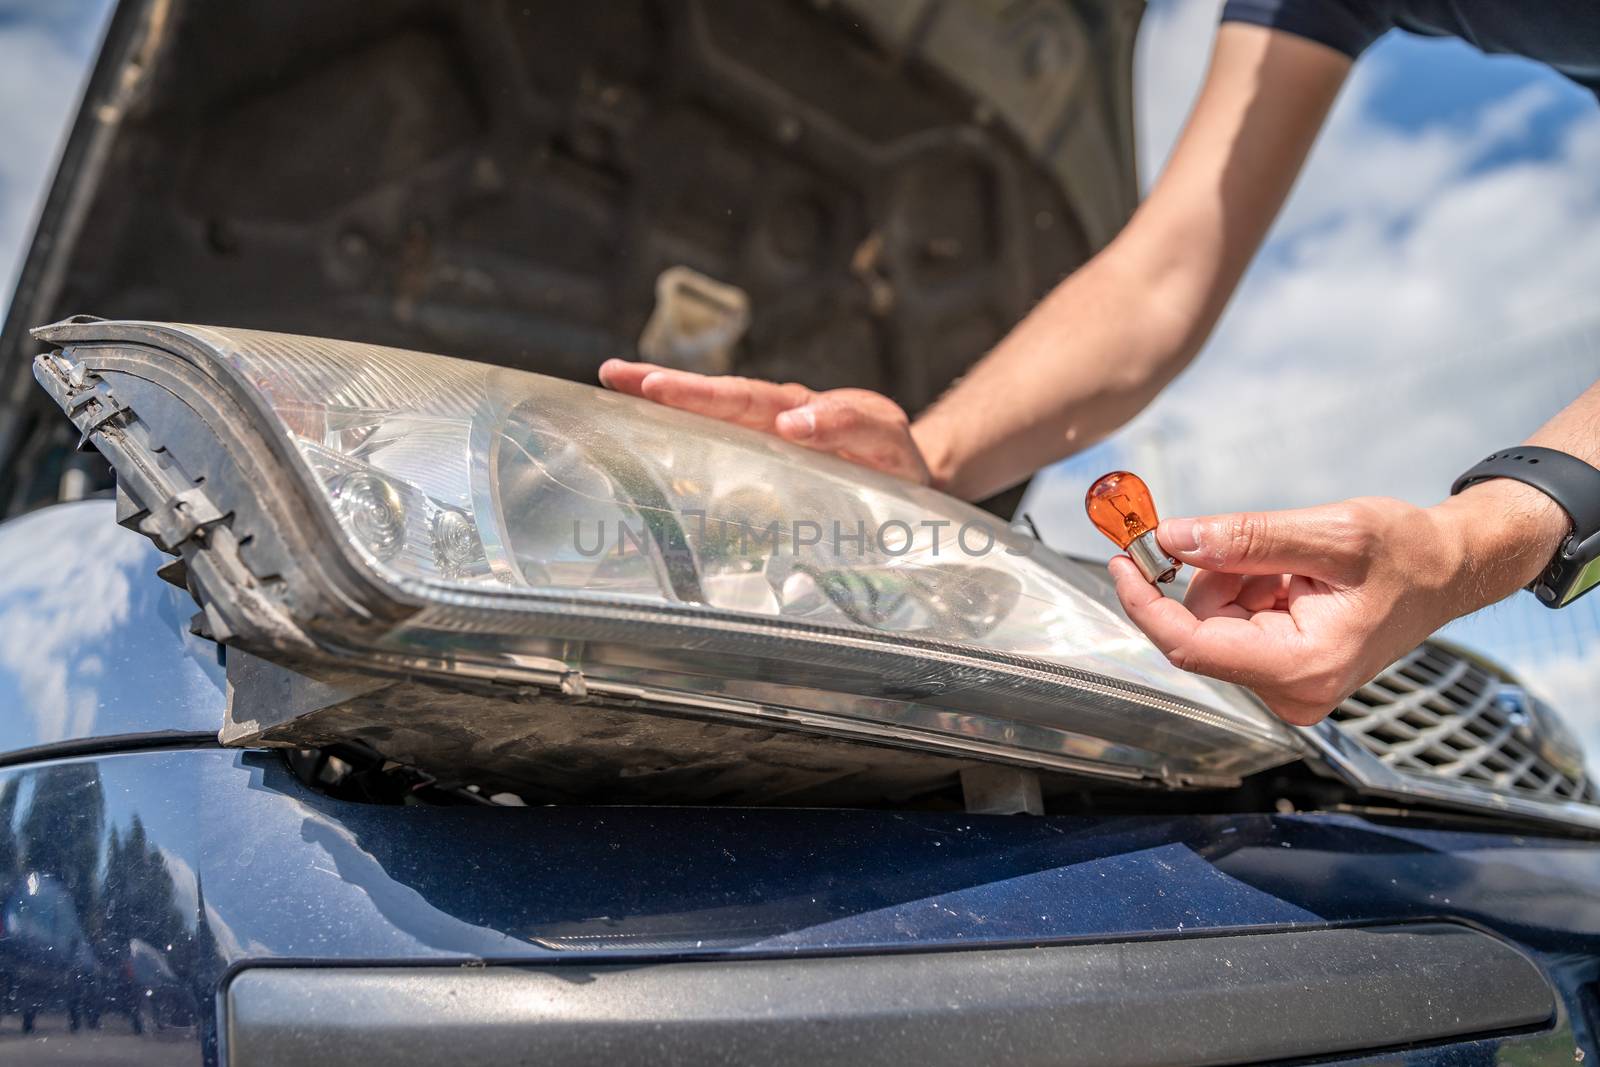 replacement of the bulb in the front headlight of a passenger car by Edophoto